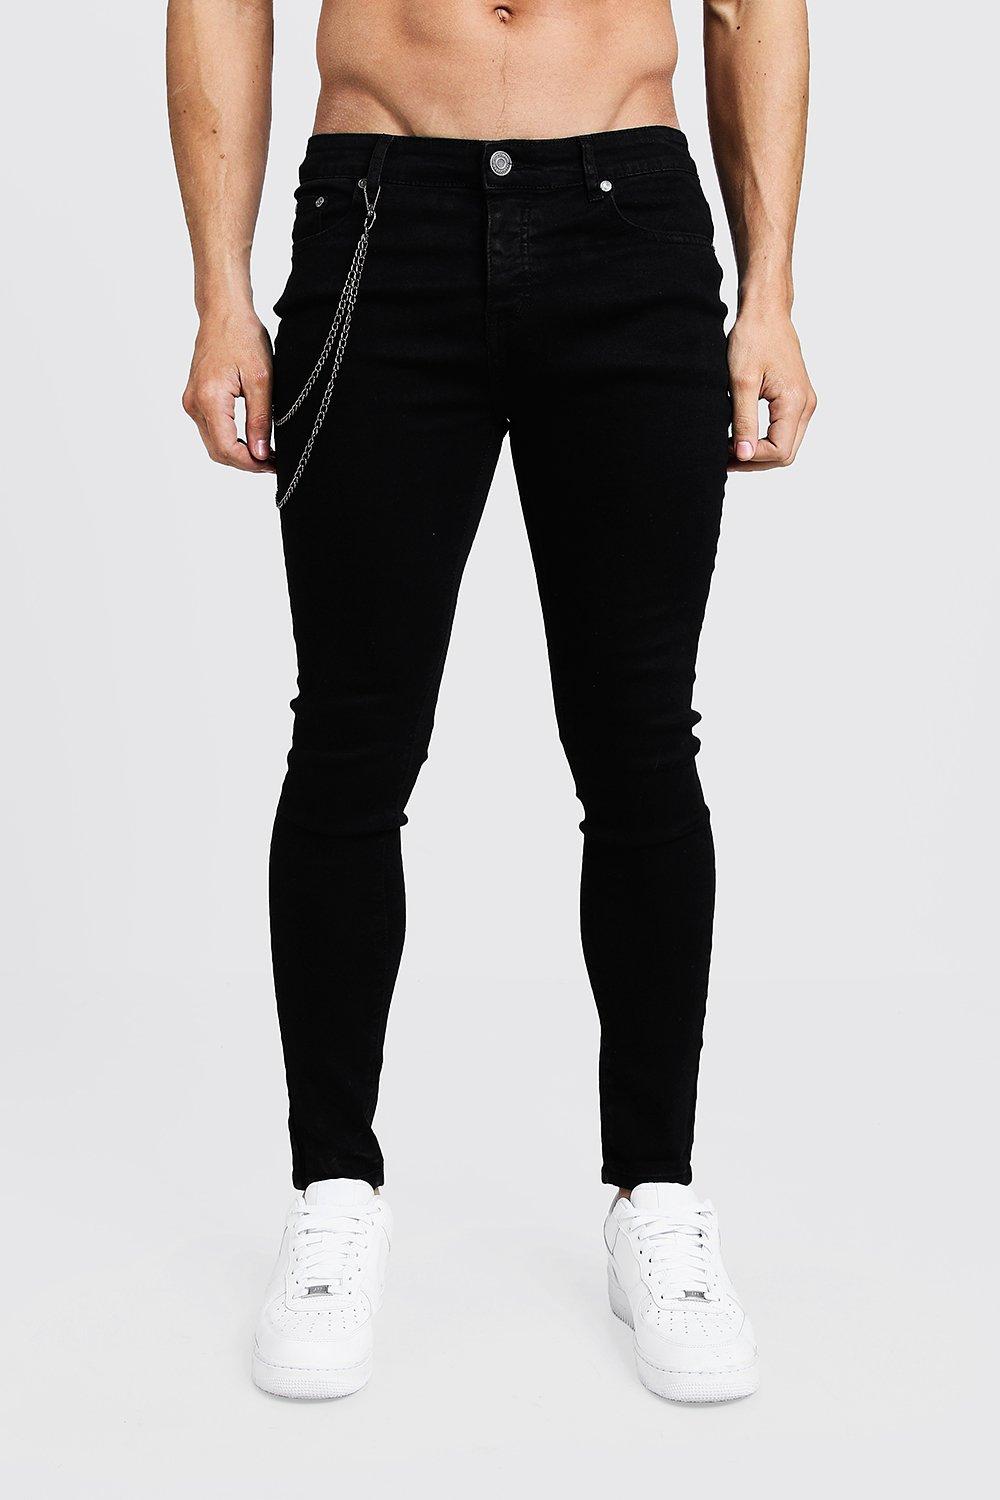 denim and supply mens jeans